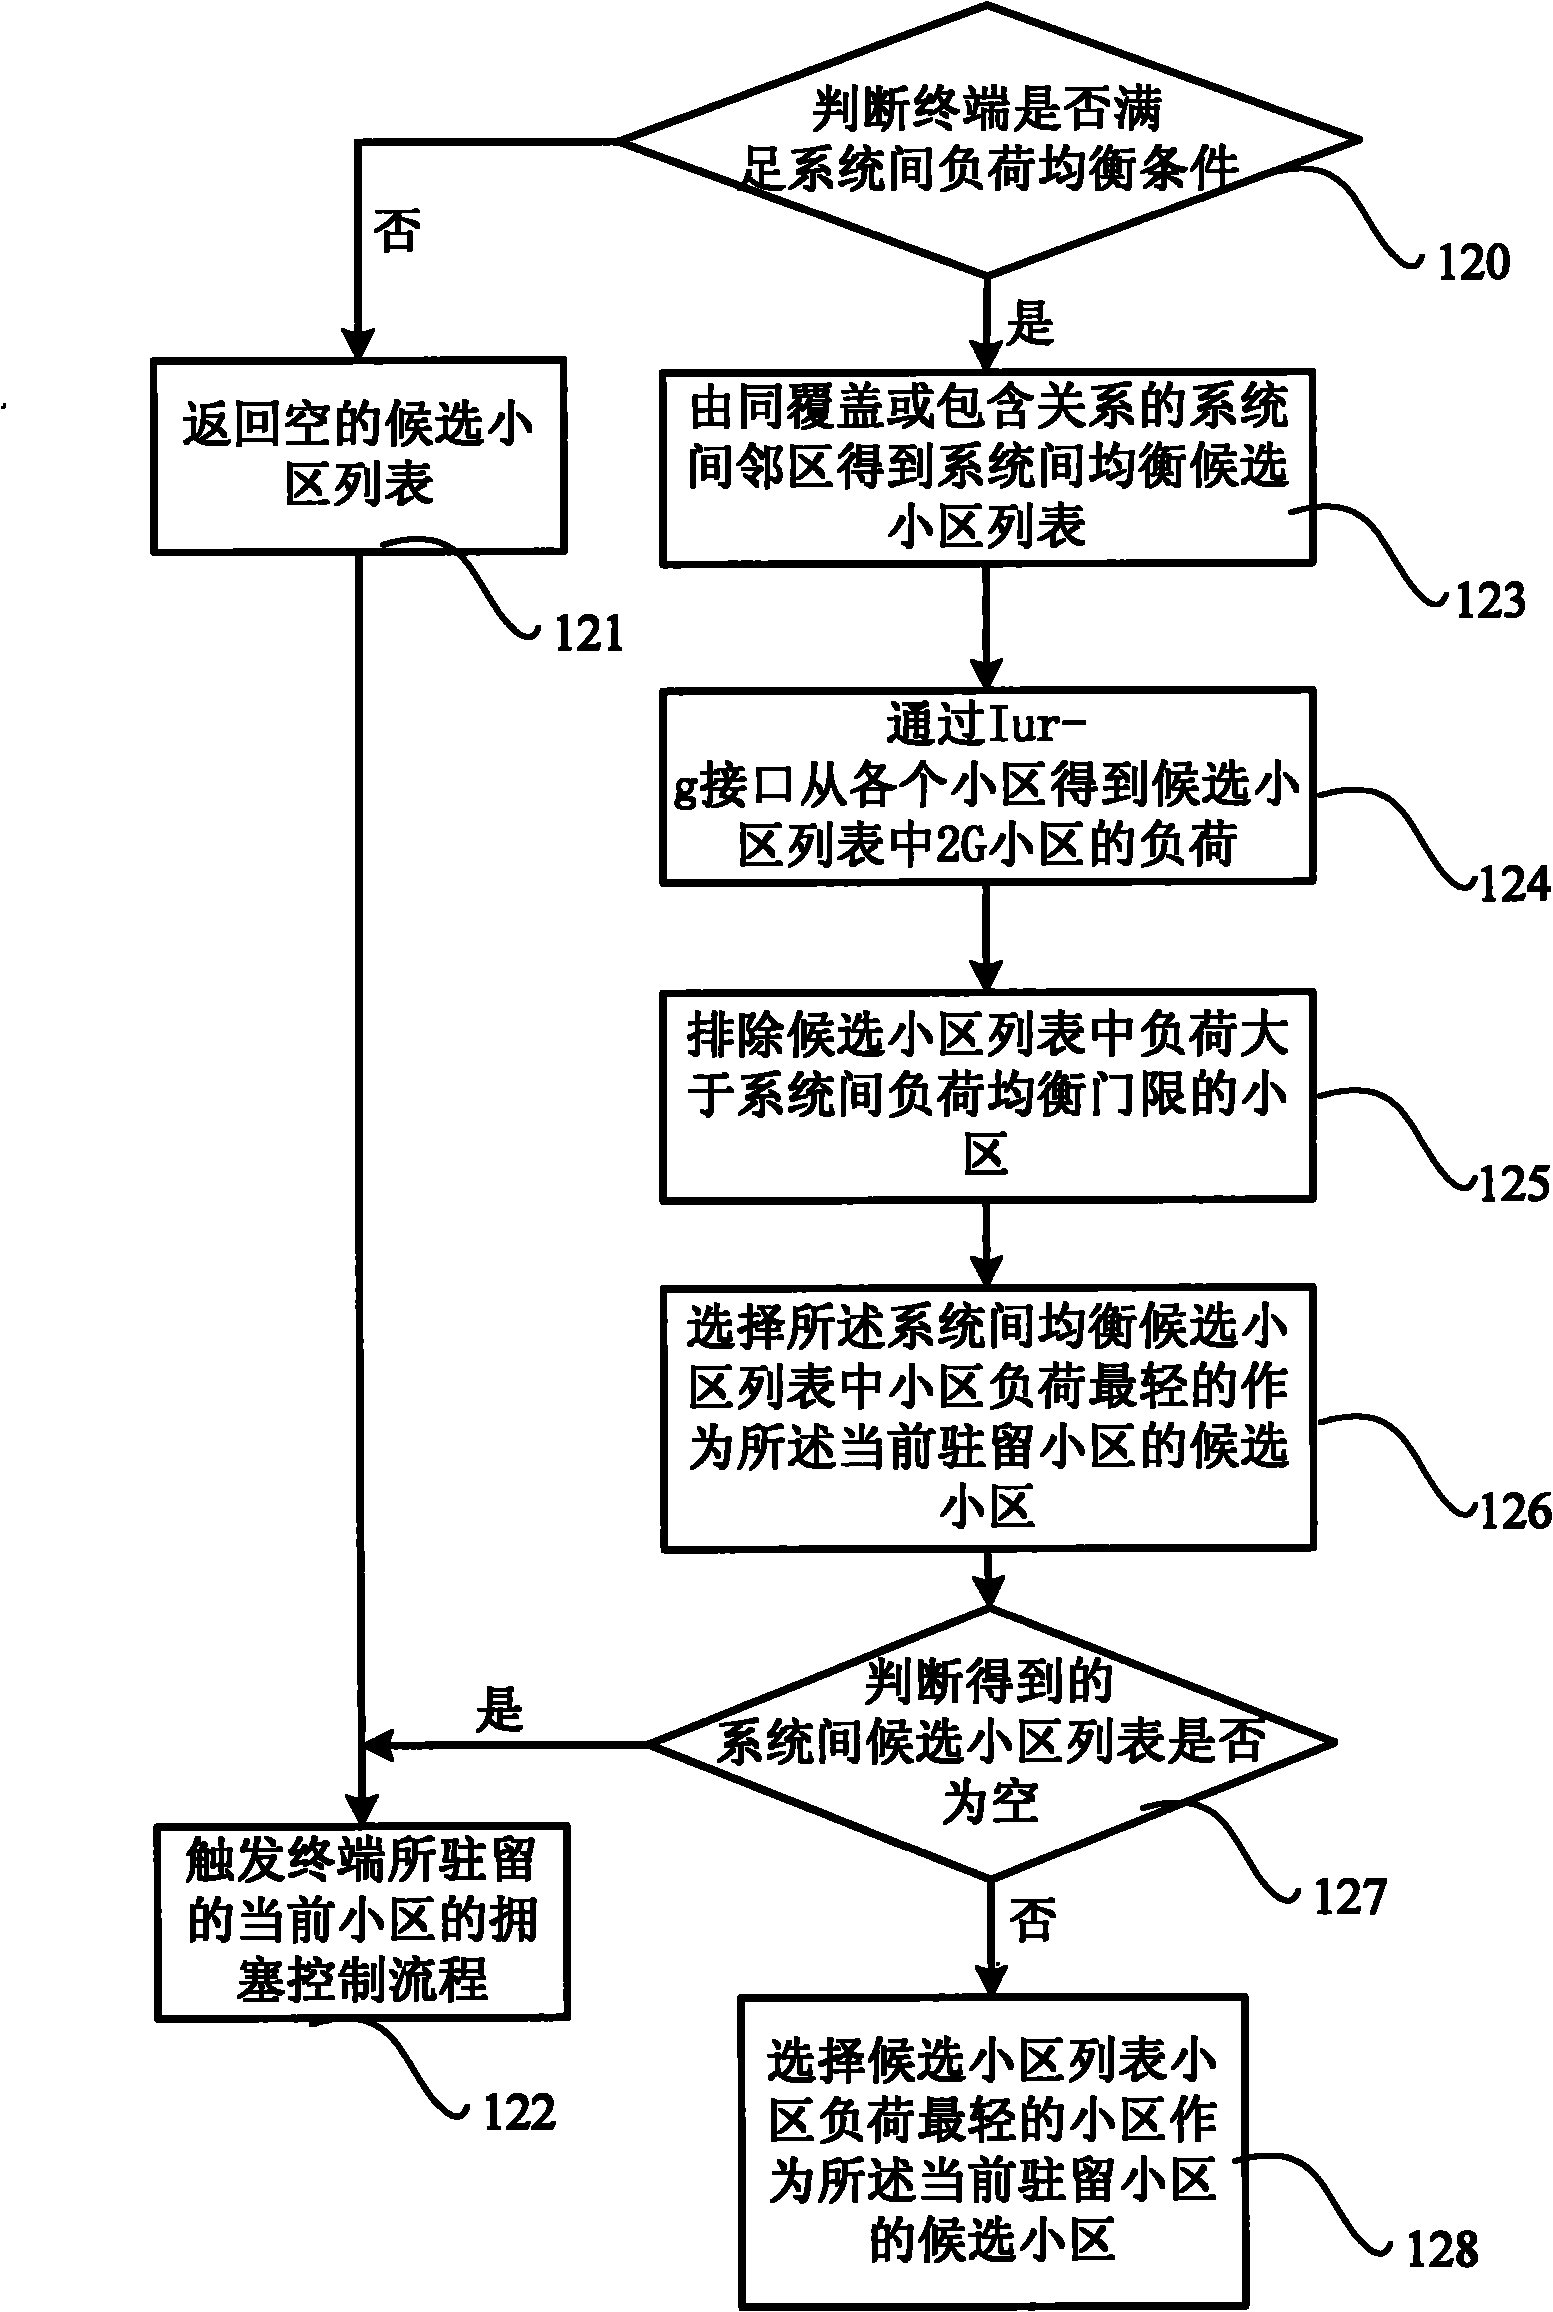 Method and controller for balancing load among cells of multiband time division-synchronous code division multiple access (TD-SCDMA) system